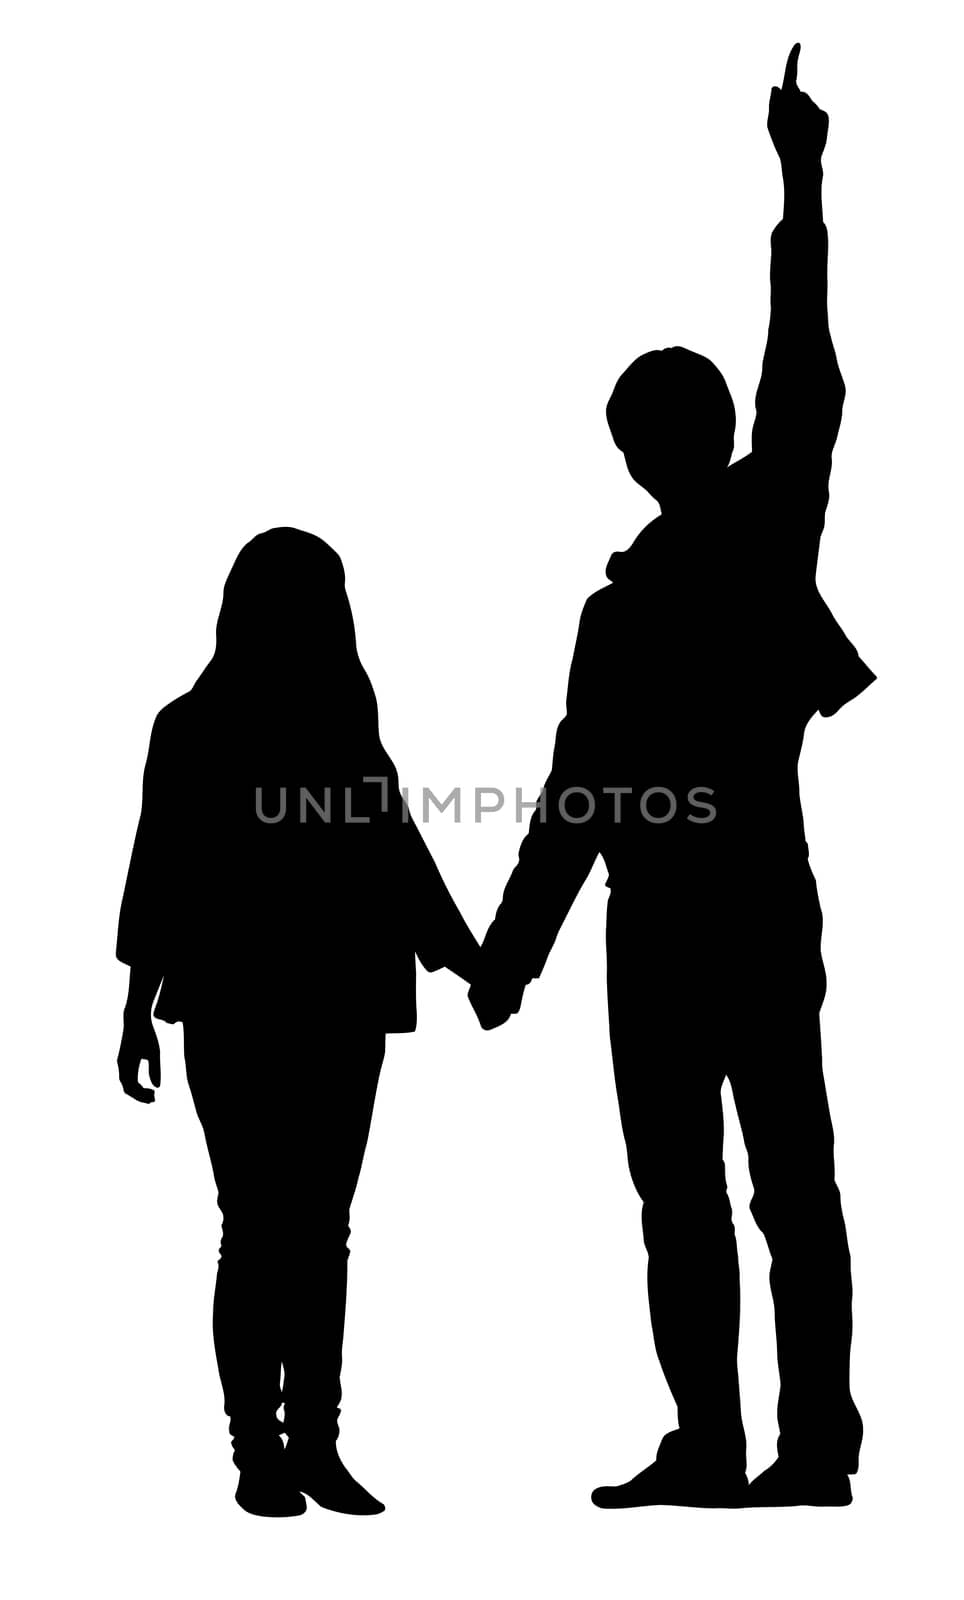 Silhouettes of men and women holding hands, isolated on white background.